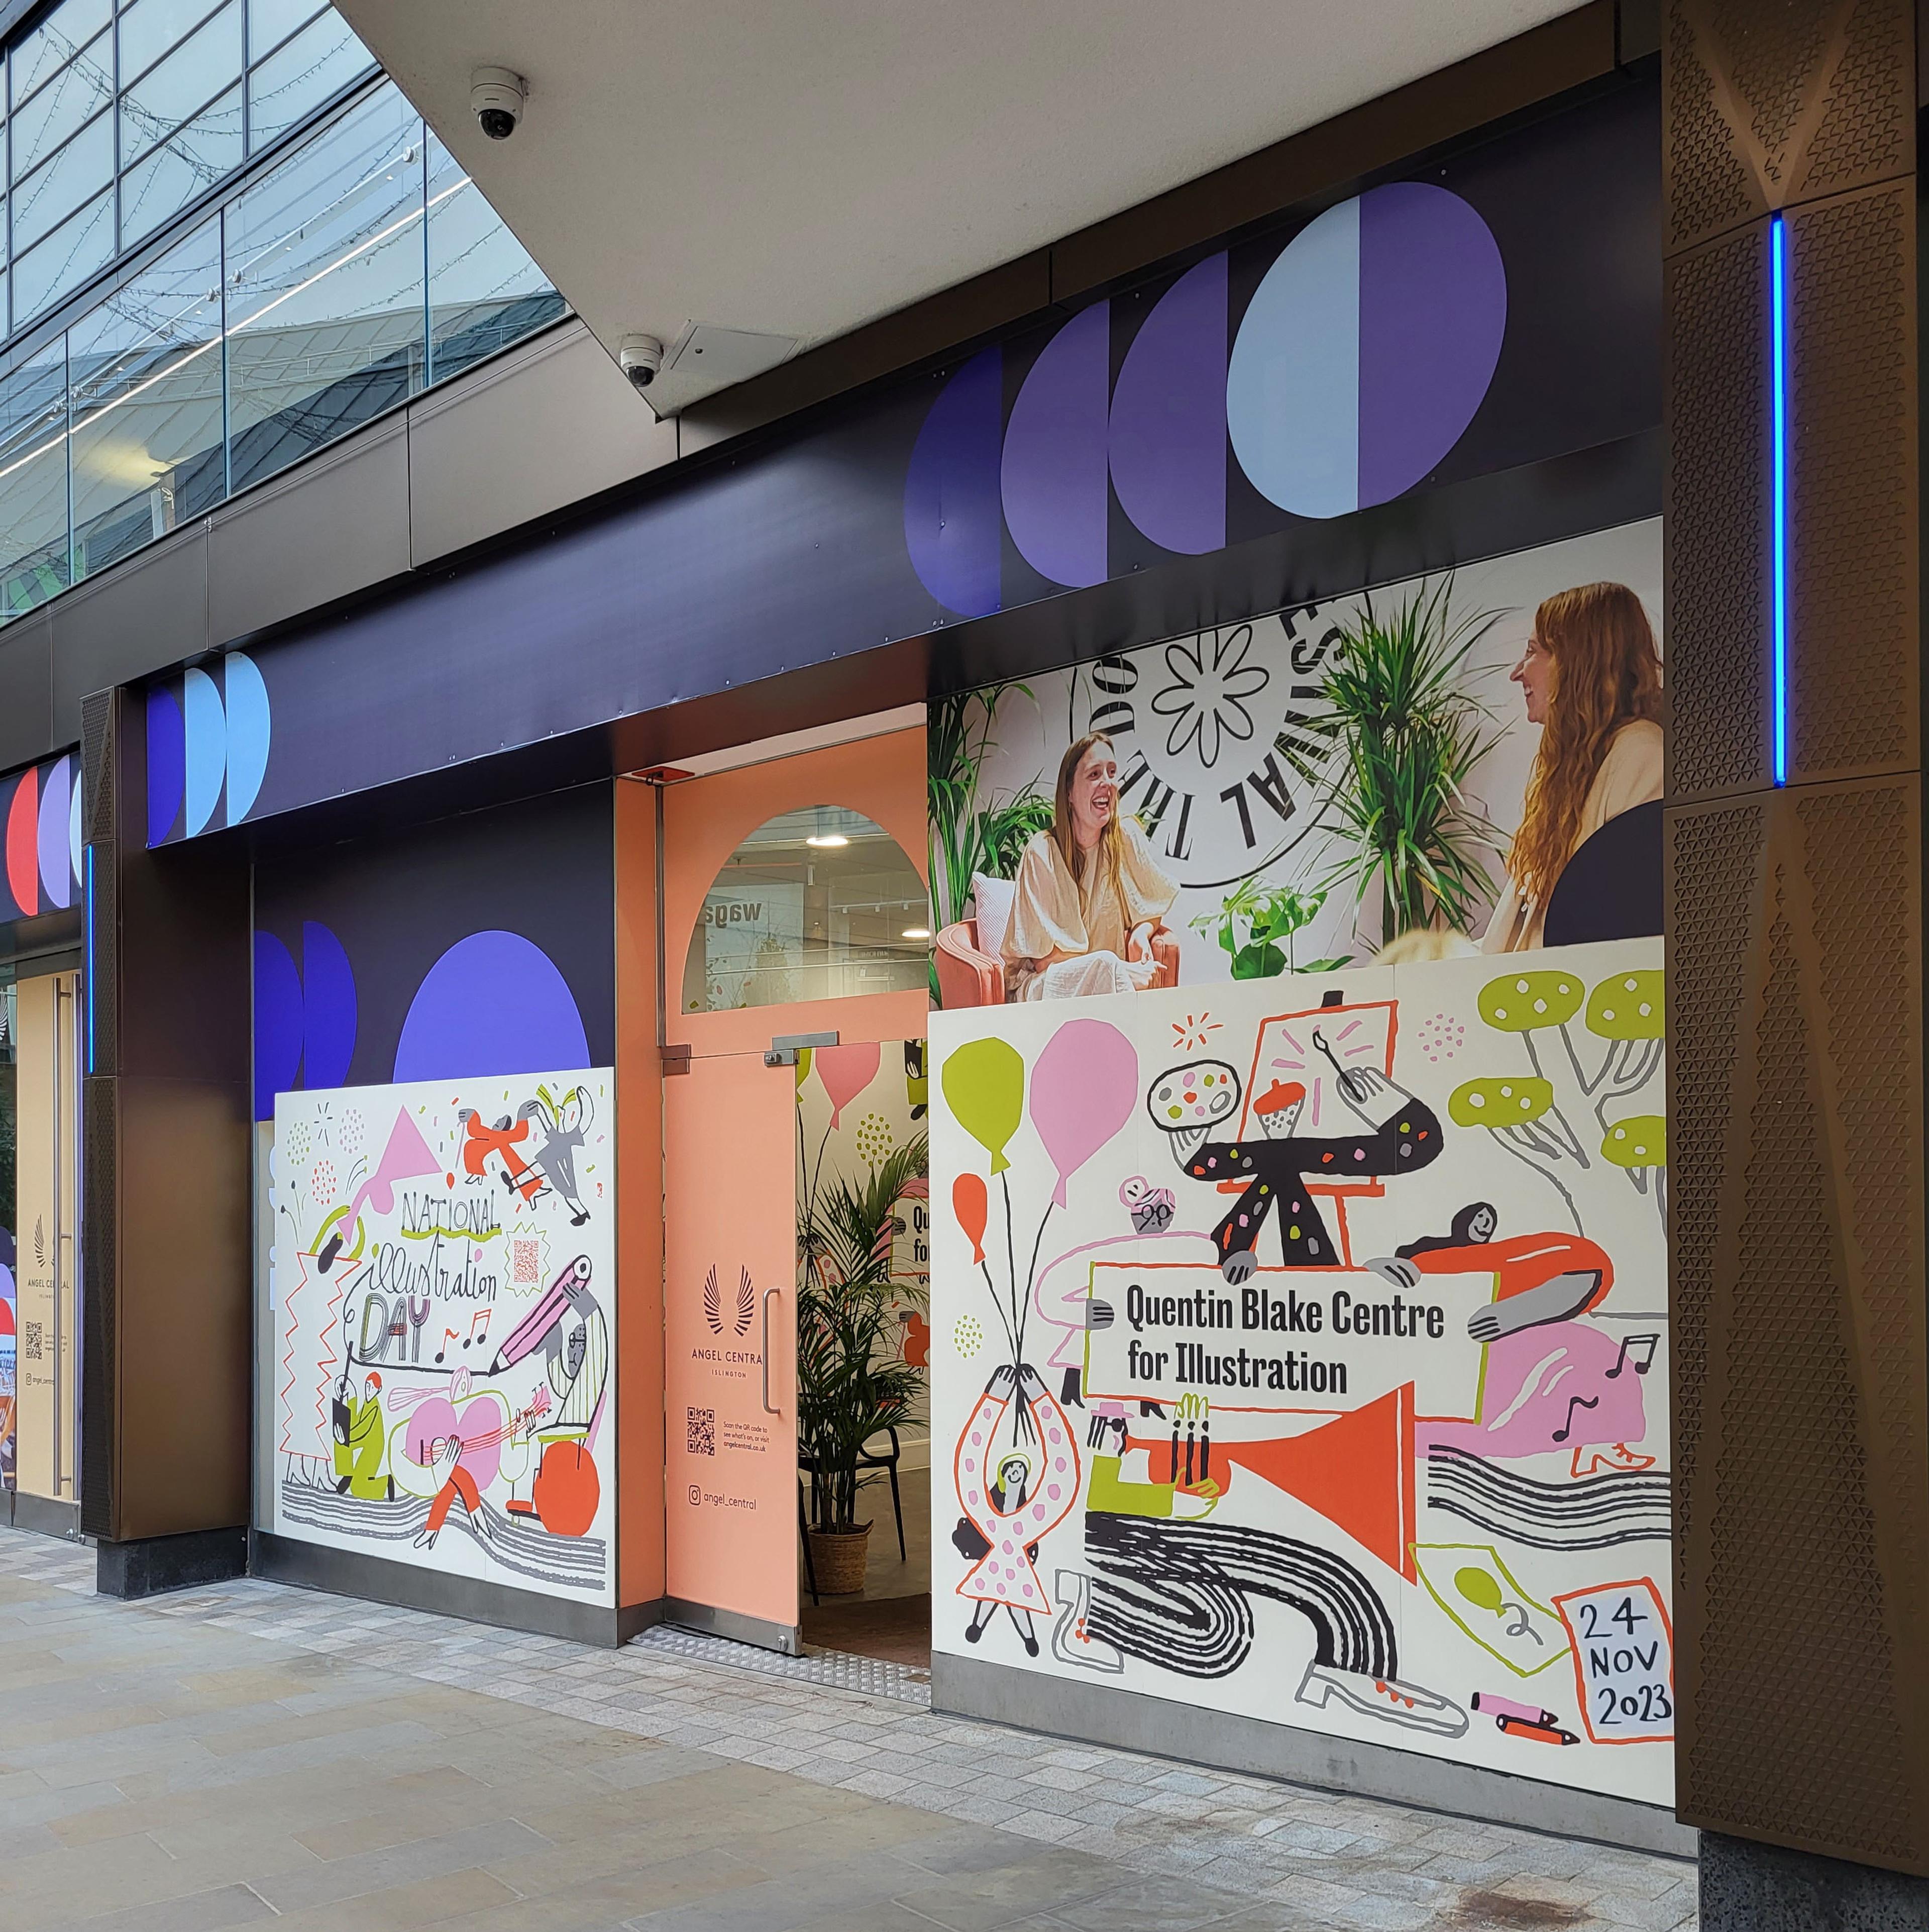 Photograph of the outside of a shop with the windows covered in illustrations.